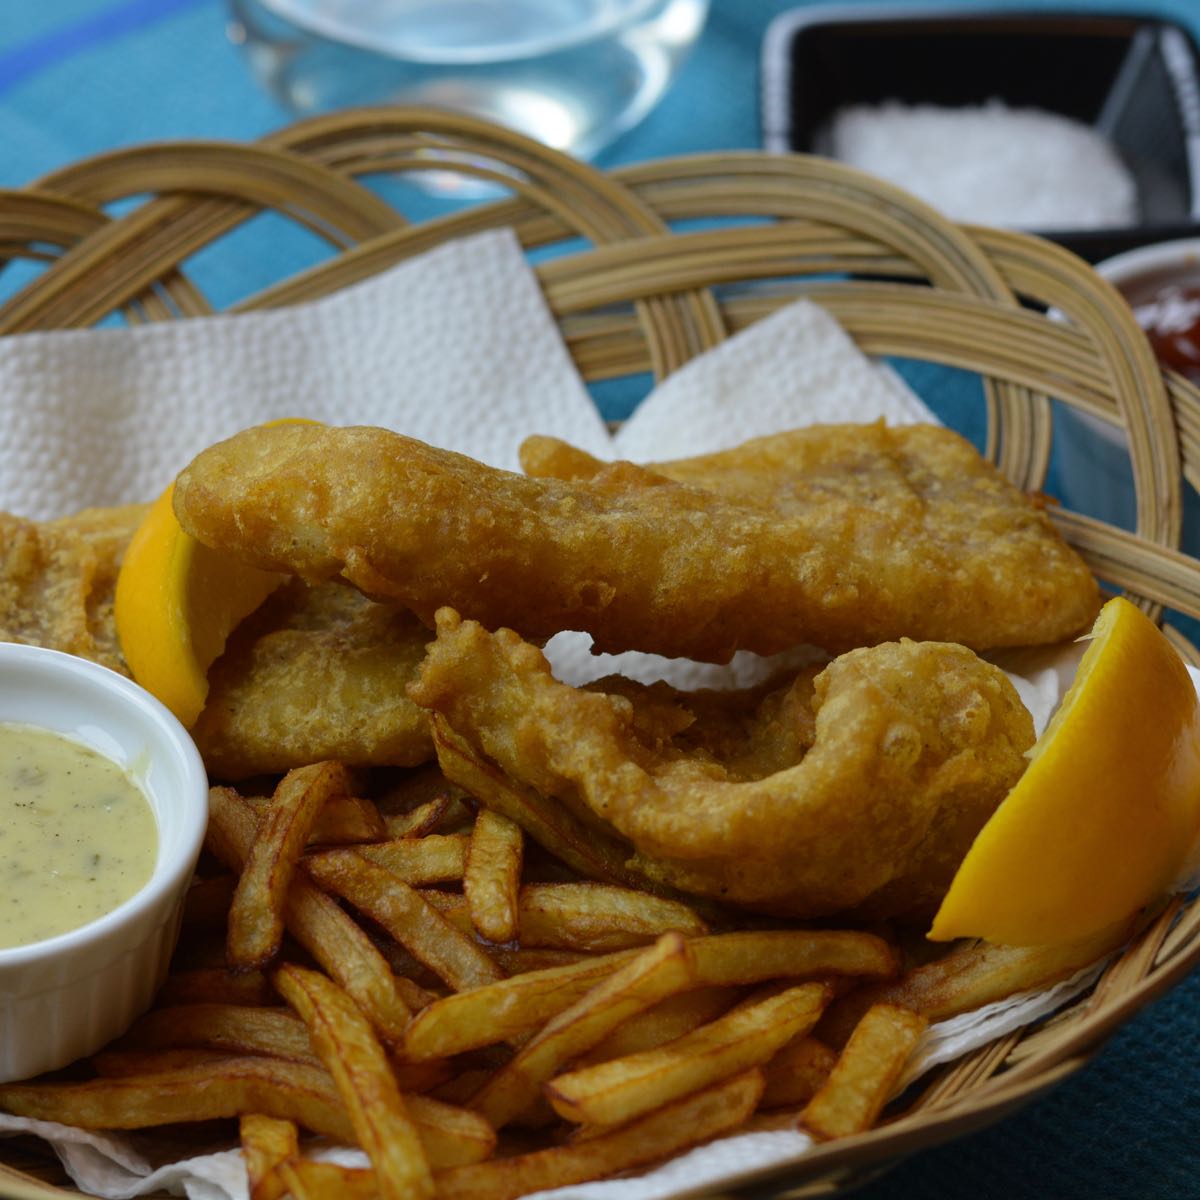 A basket full of gluten free Battered Fish and Chips with lemon wedges and a dish of tartar sauce.